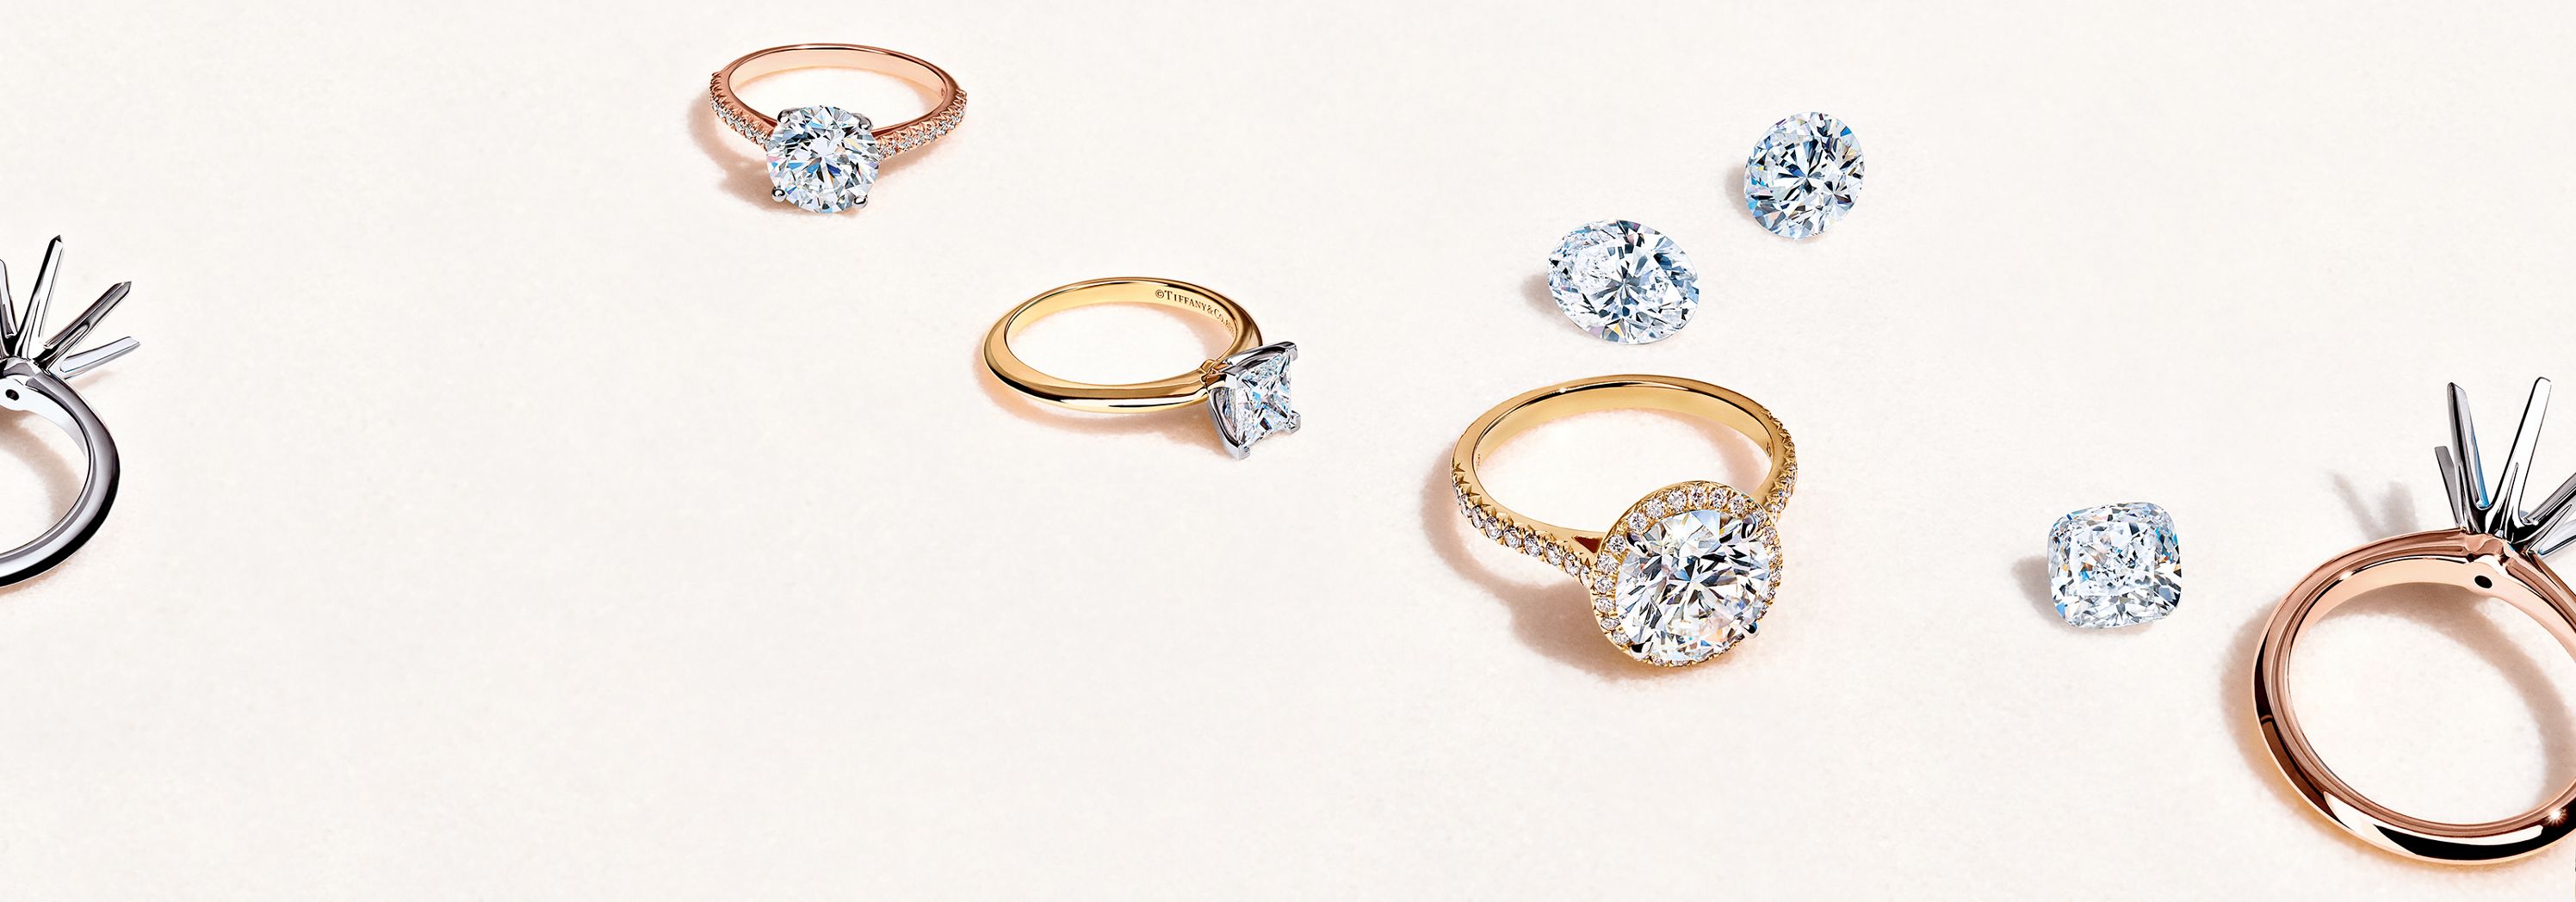 Engagement Ring Styles And Settings Tiffany Co